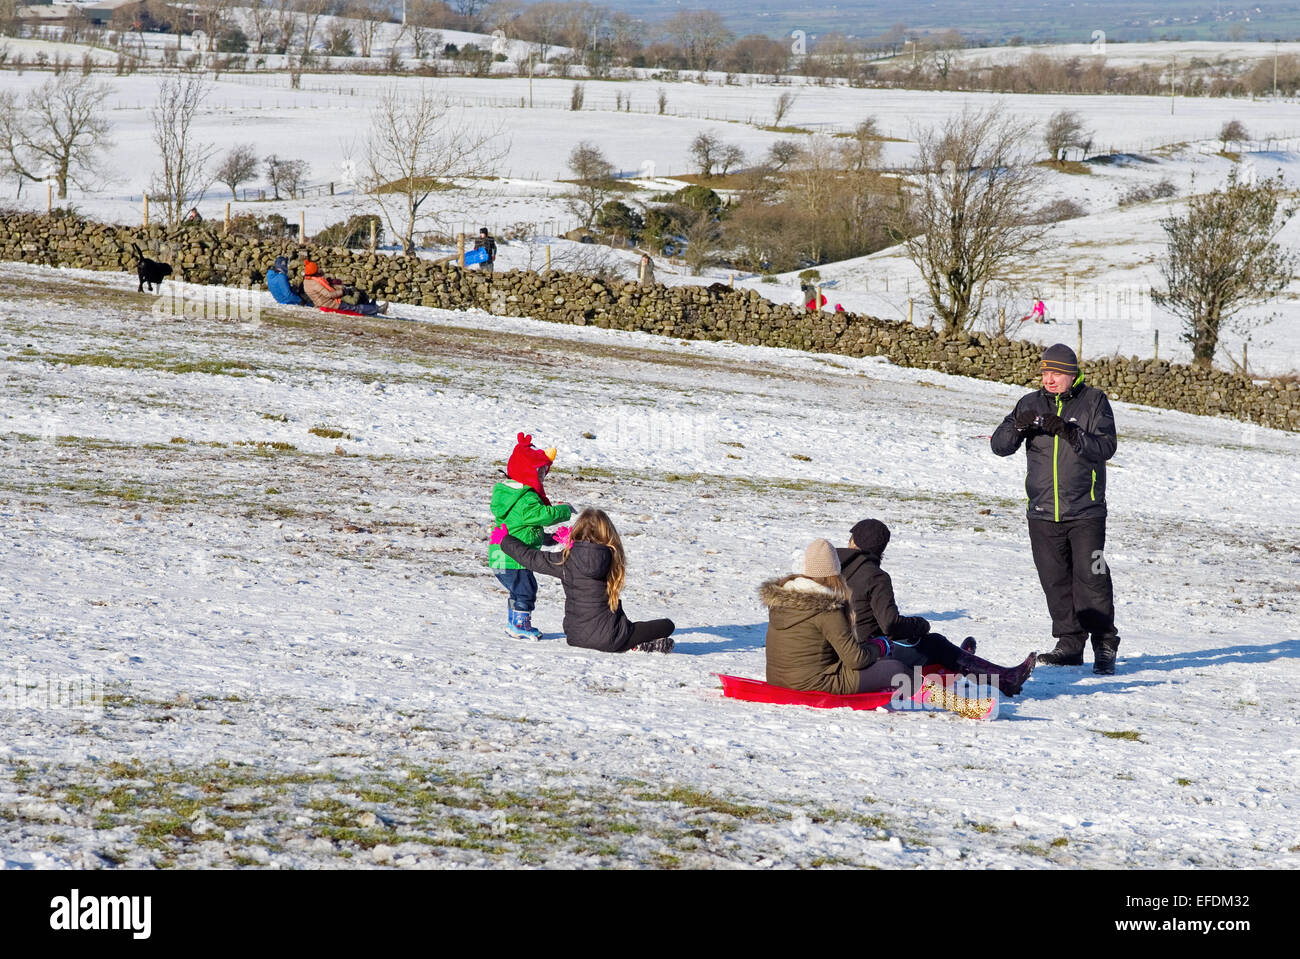 Lake District, Cumbria, UK. 1st February, 2015. UK Weather: After the recent snowfall, on a sunny but bitterly cold day, families enjoy sledging on the fells near Caldbeck, the Lake District, Cumbria, England UK. Credit:  Julie Fryer/Alamy Live News Stock Photo